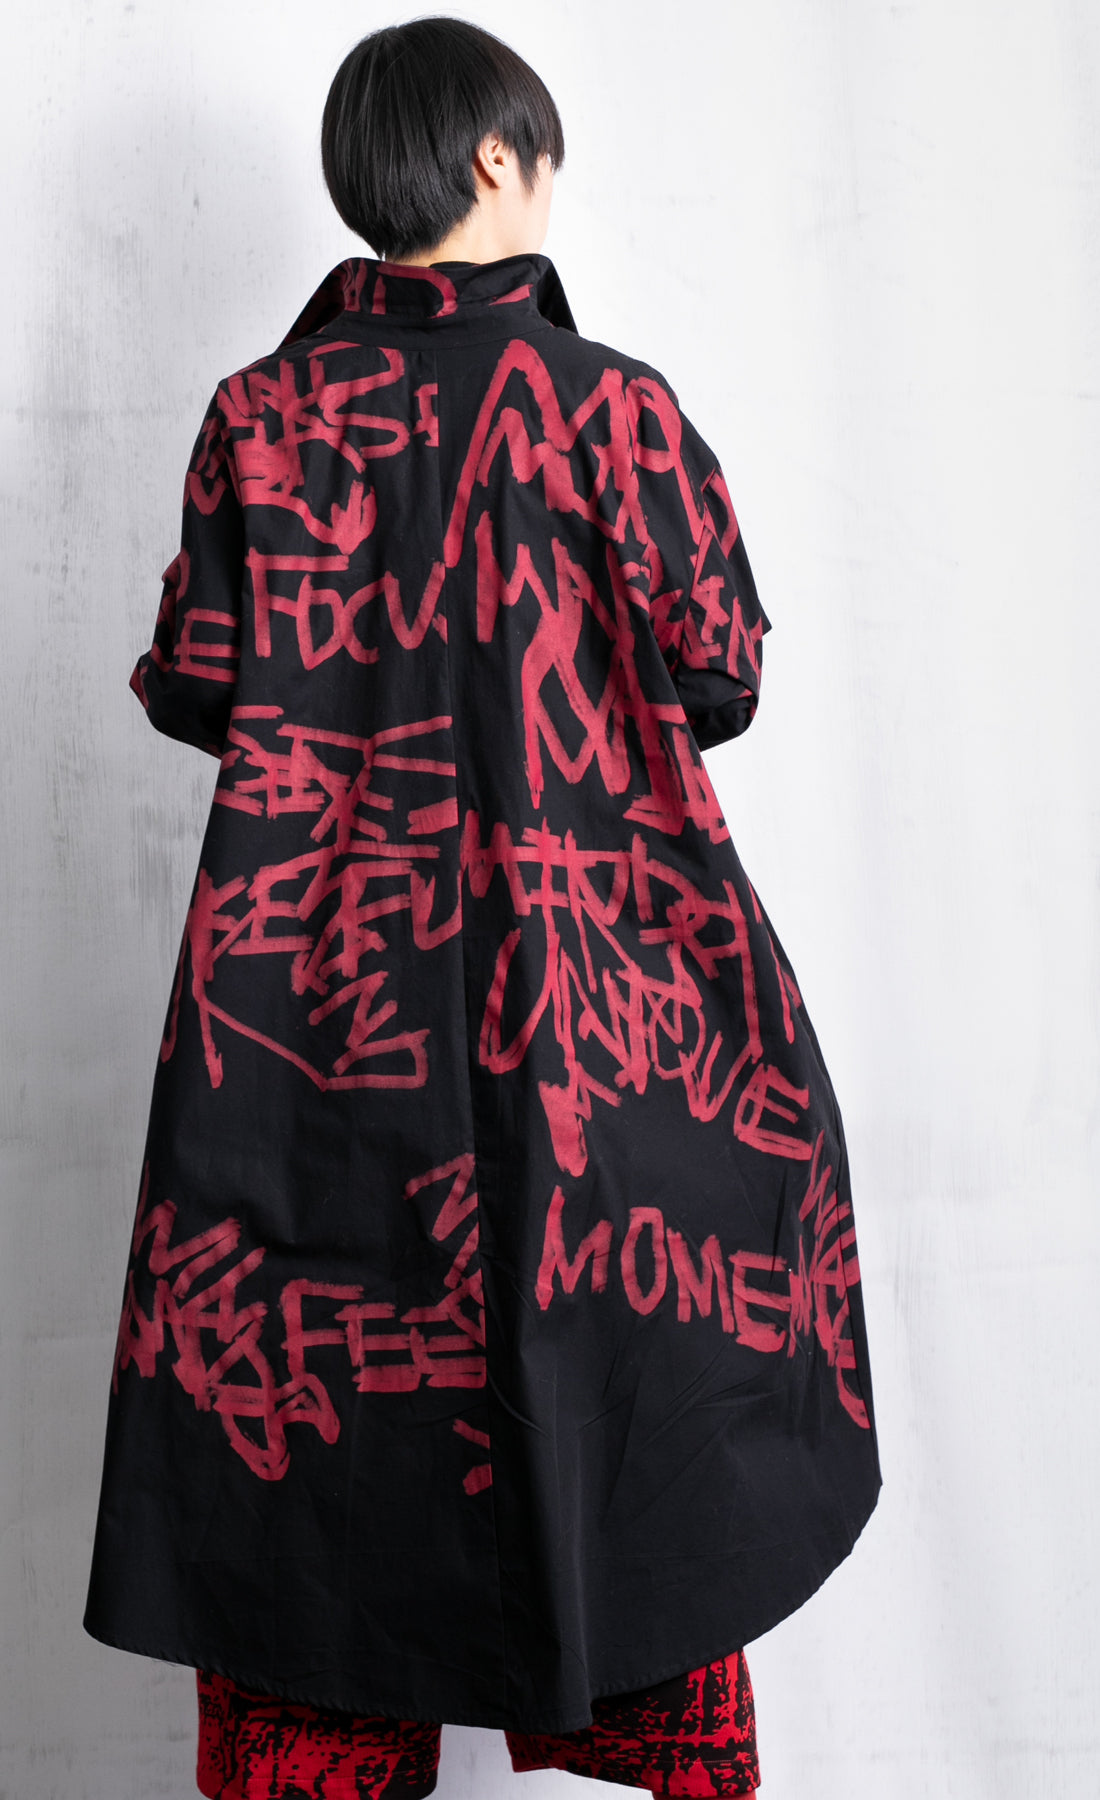 Back full body view of a woman wearing red pants and a black shirt/dress with red scribble print all over it. This shirt dress has a button down front, long sleeves, and comes down to the knees.